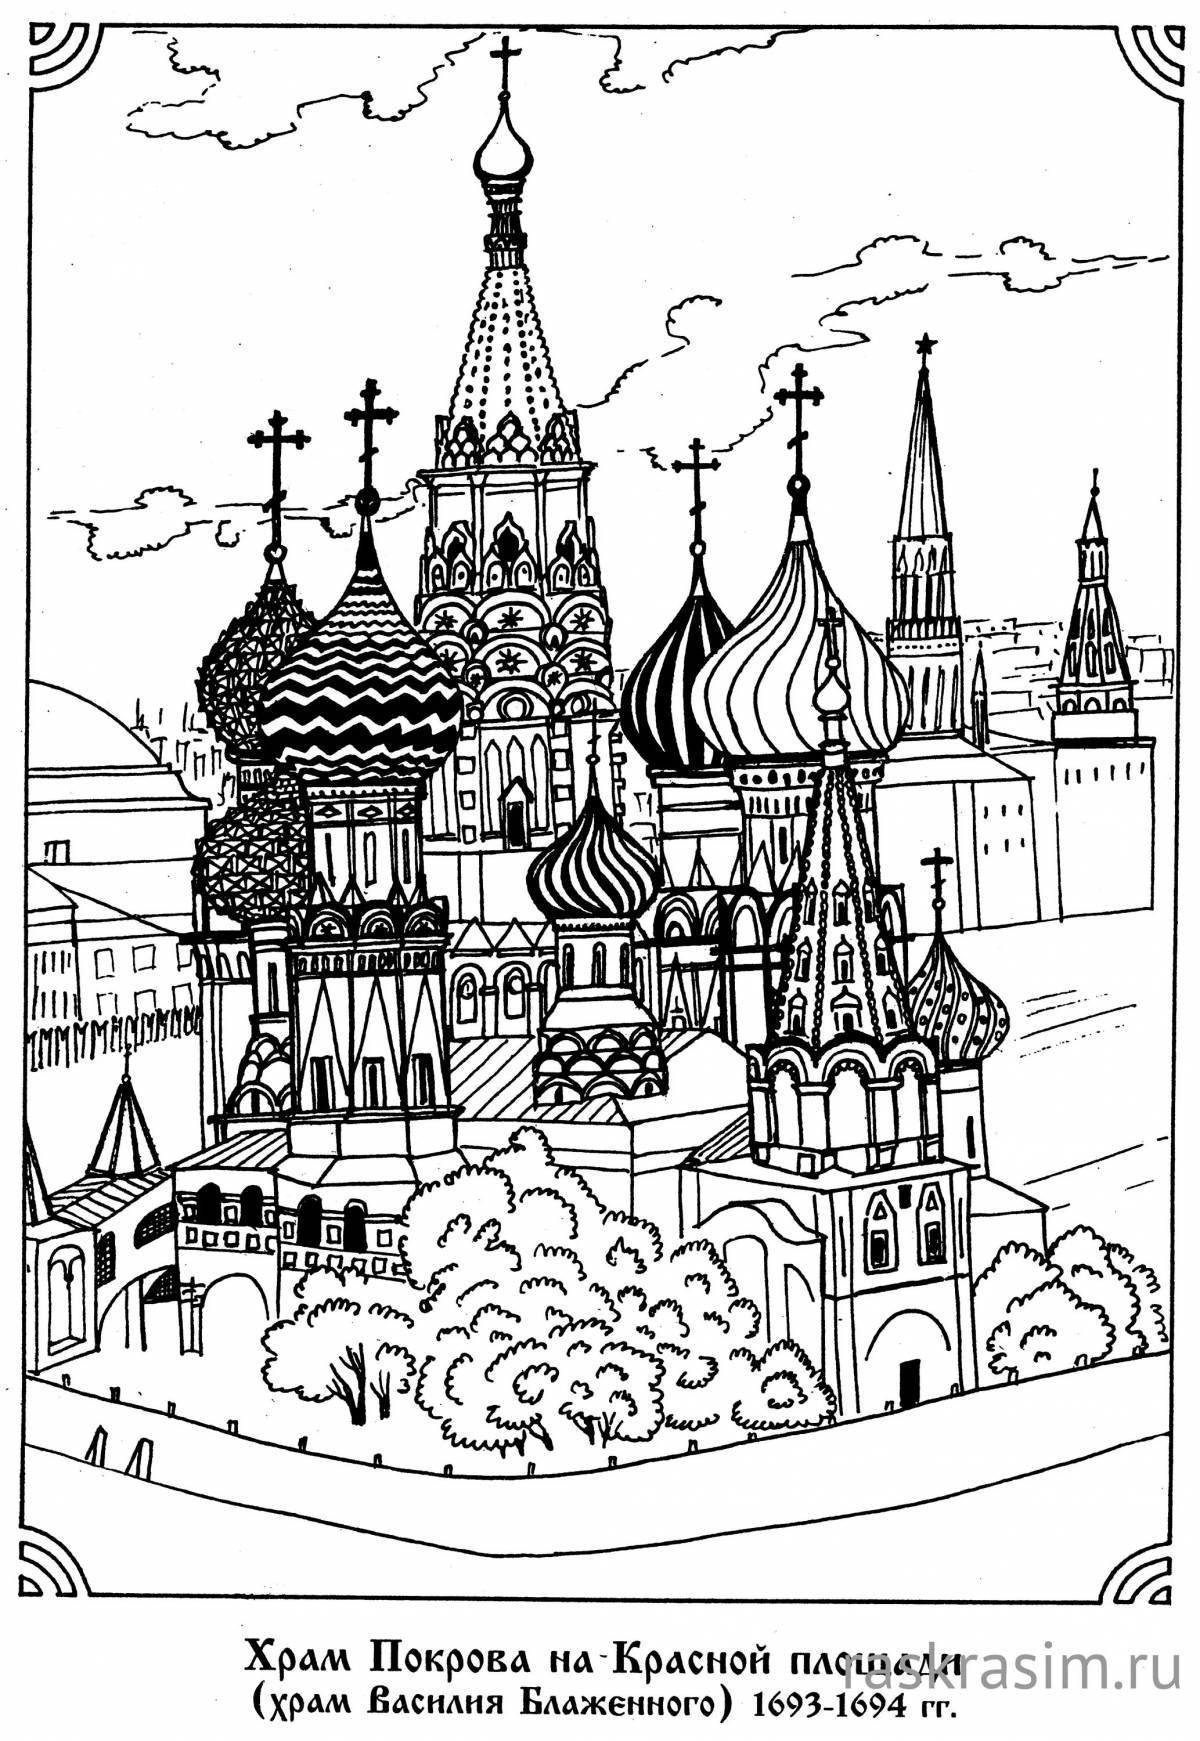 Royal golden ring of Russia coloring book